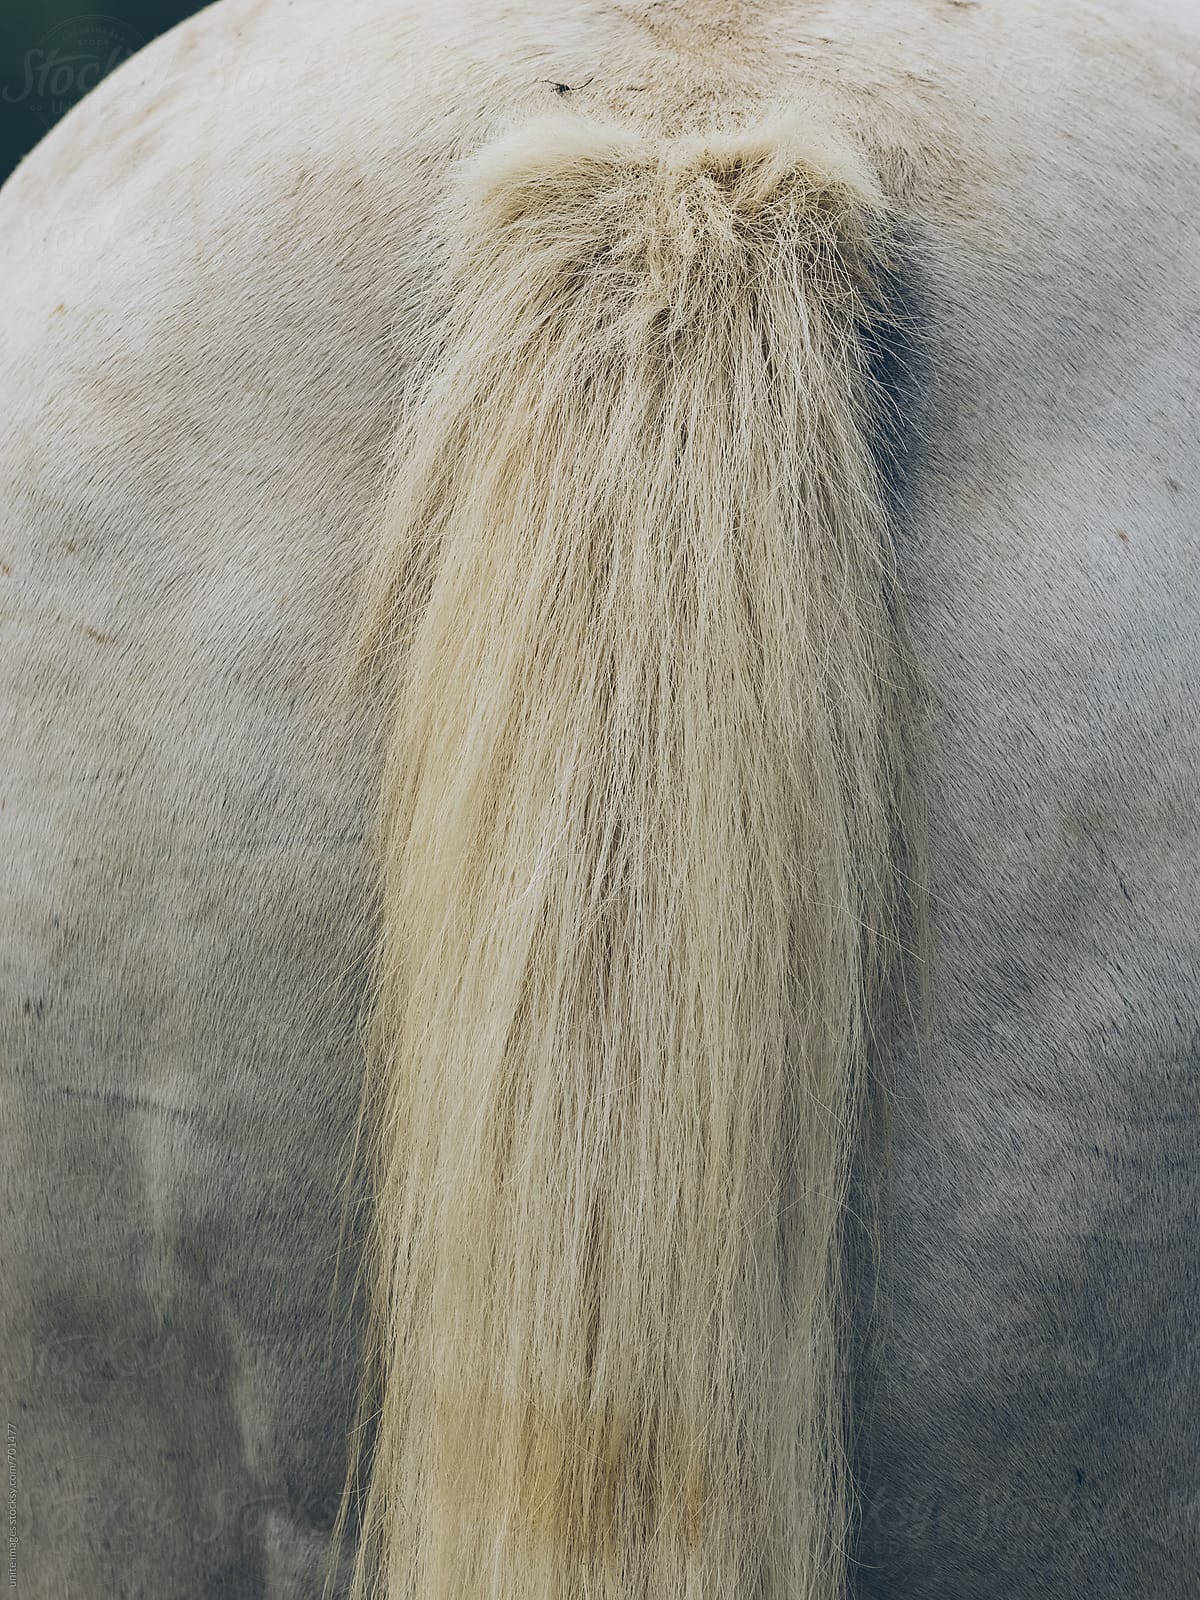 the tail of a white horse